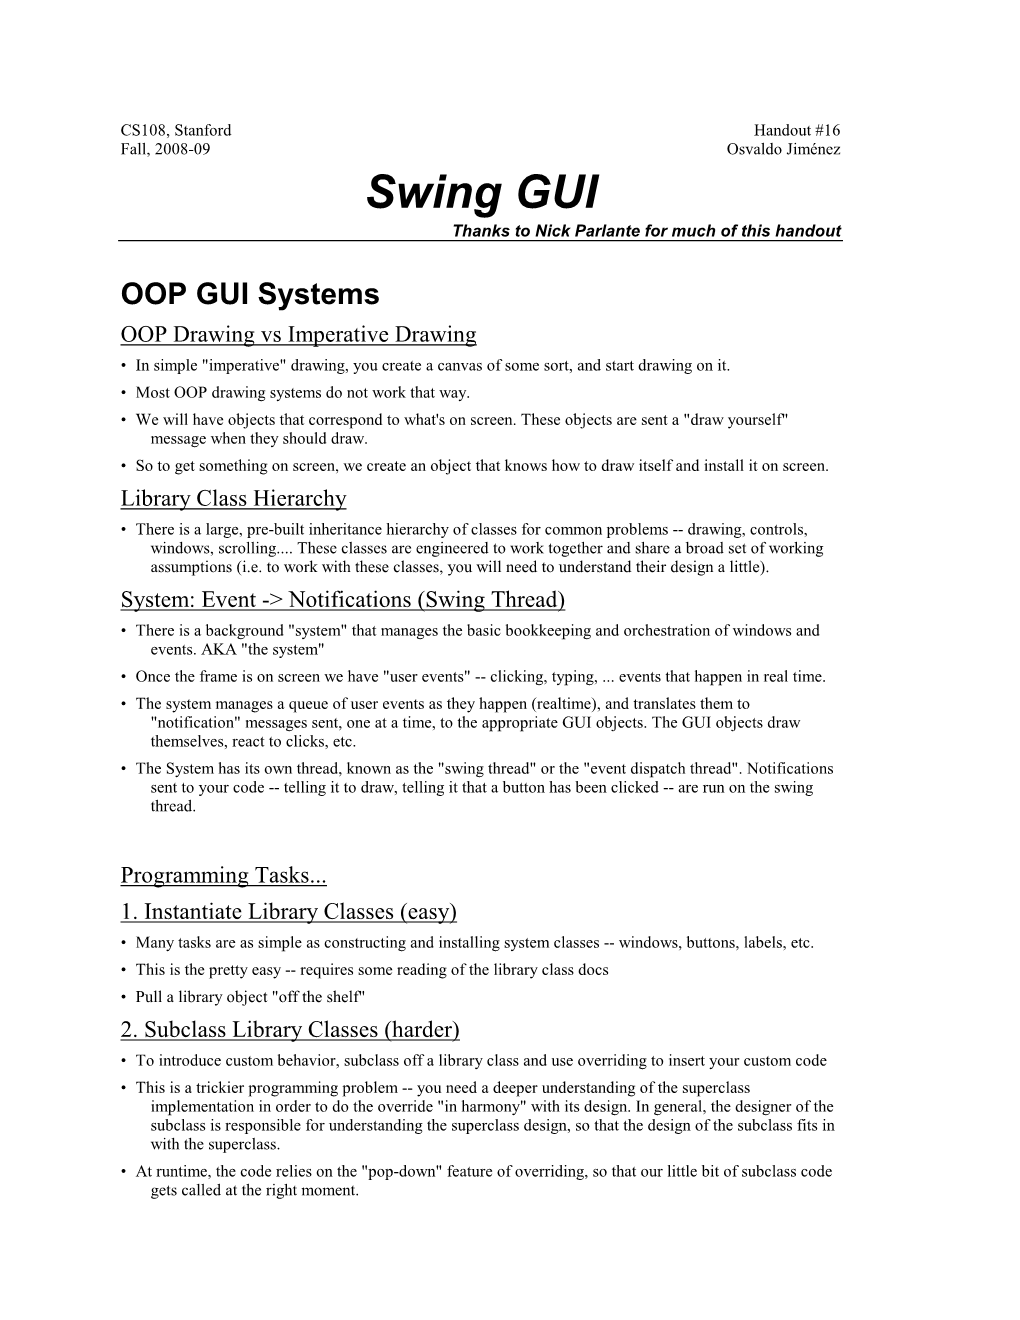 Swing GUI Thanks to Nick Parlante for Much of This Handout